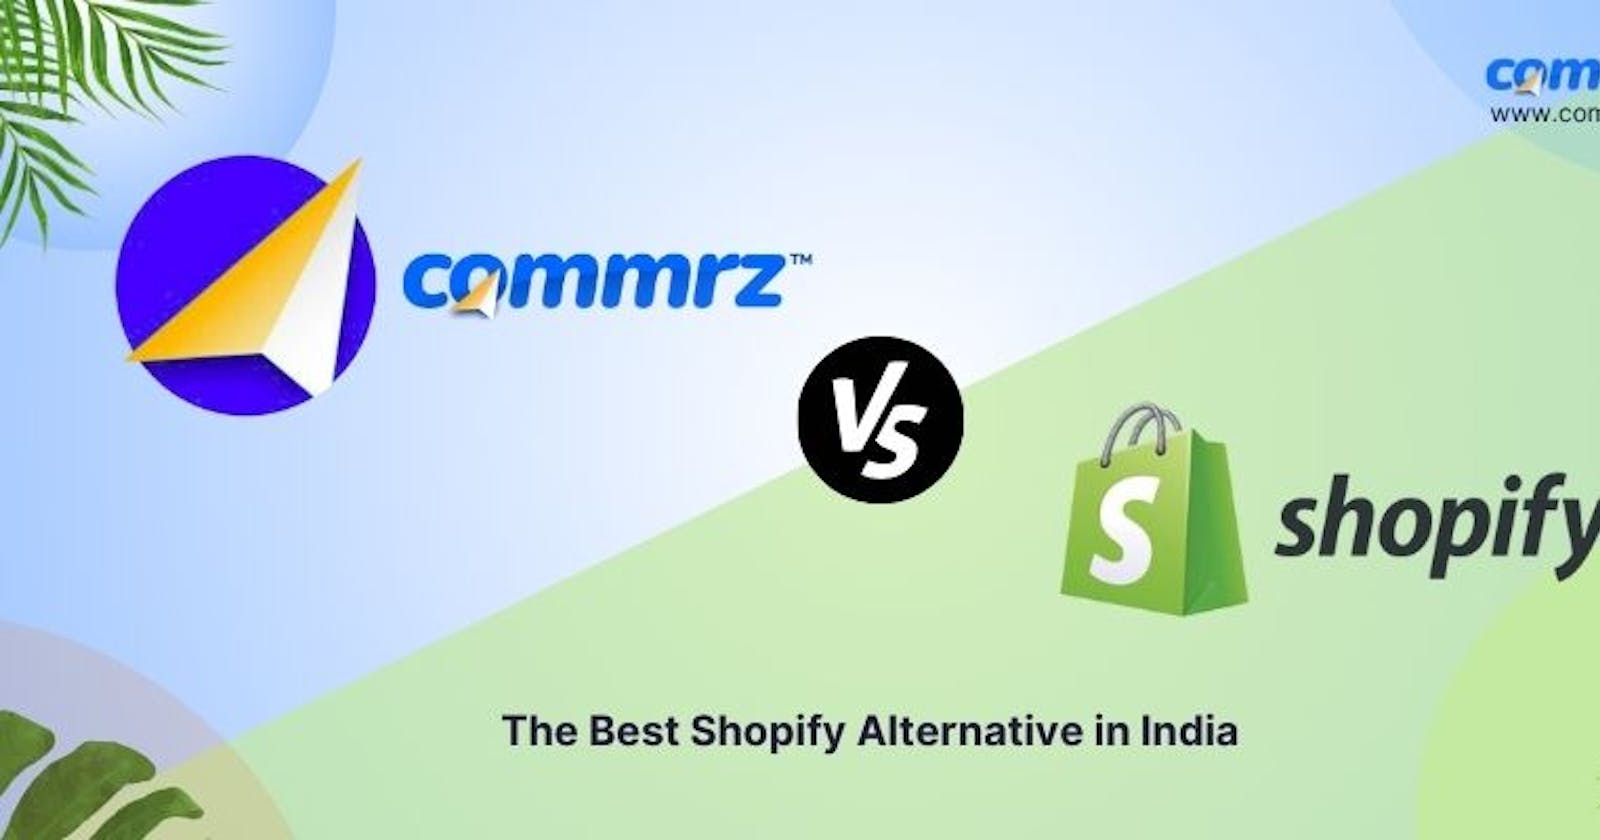 Commrz: Shopify Alternatives in India